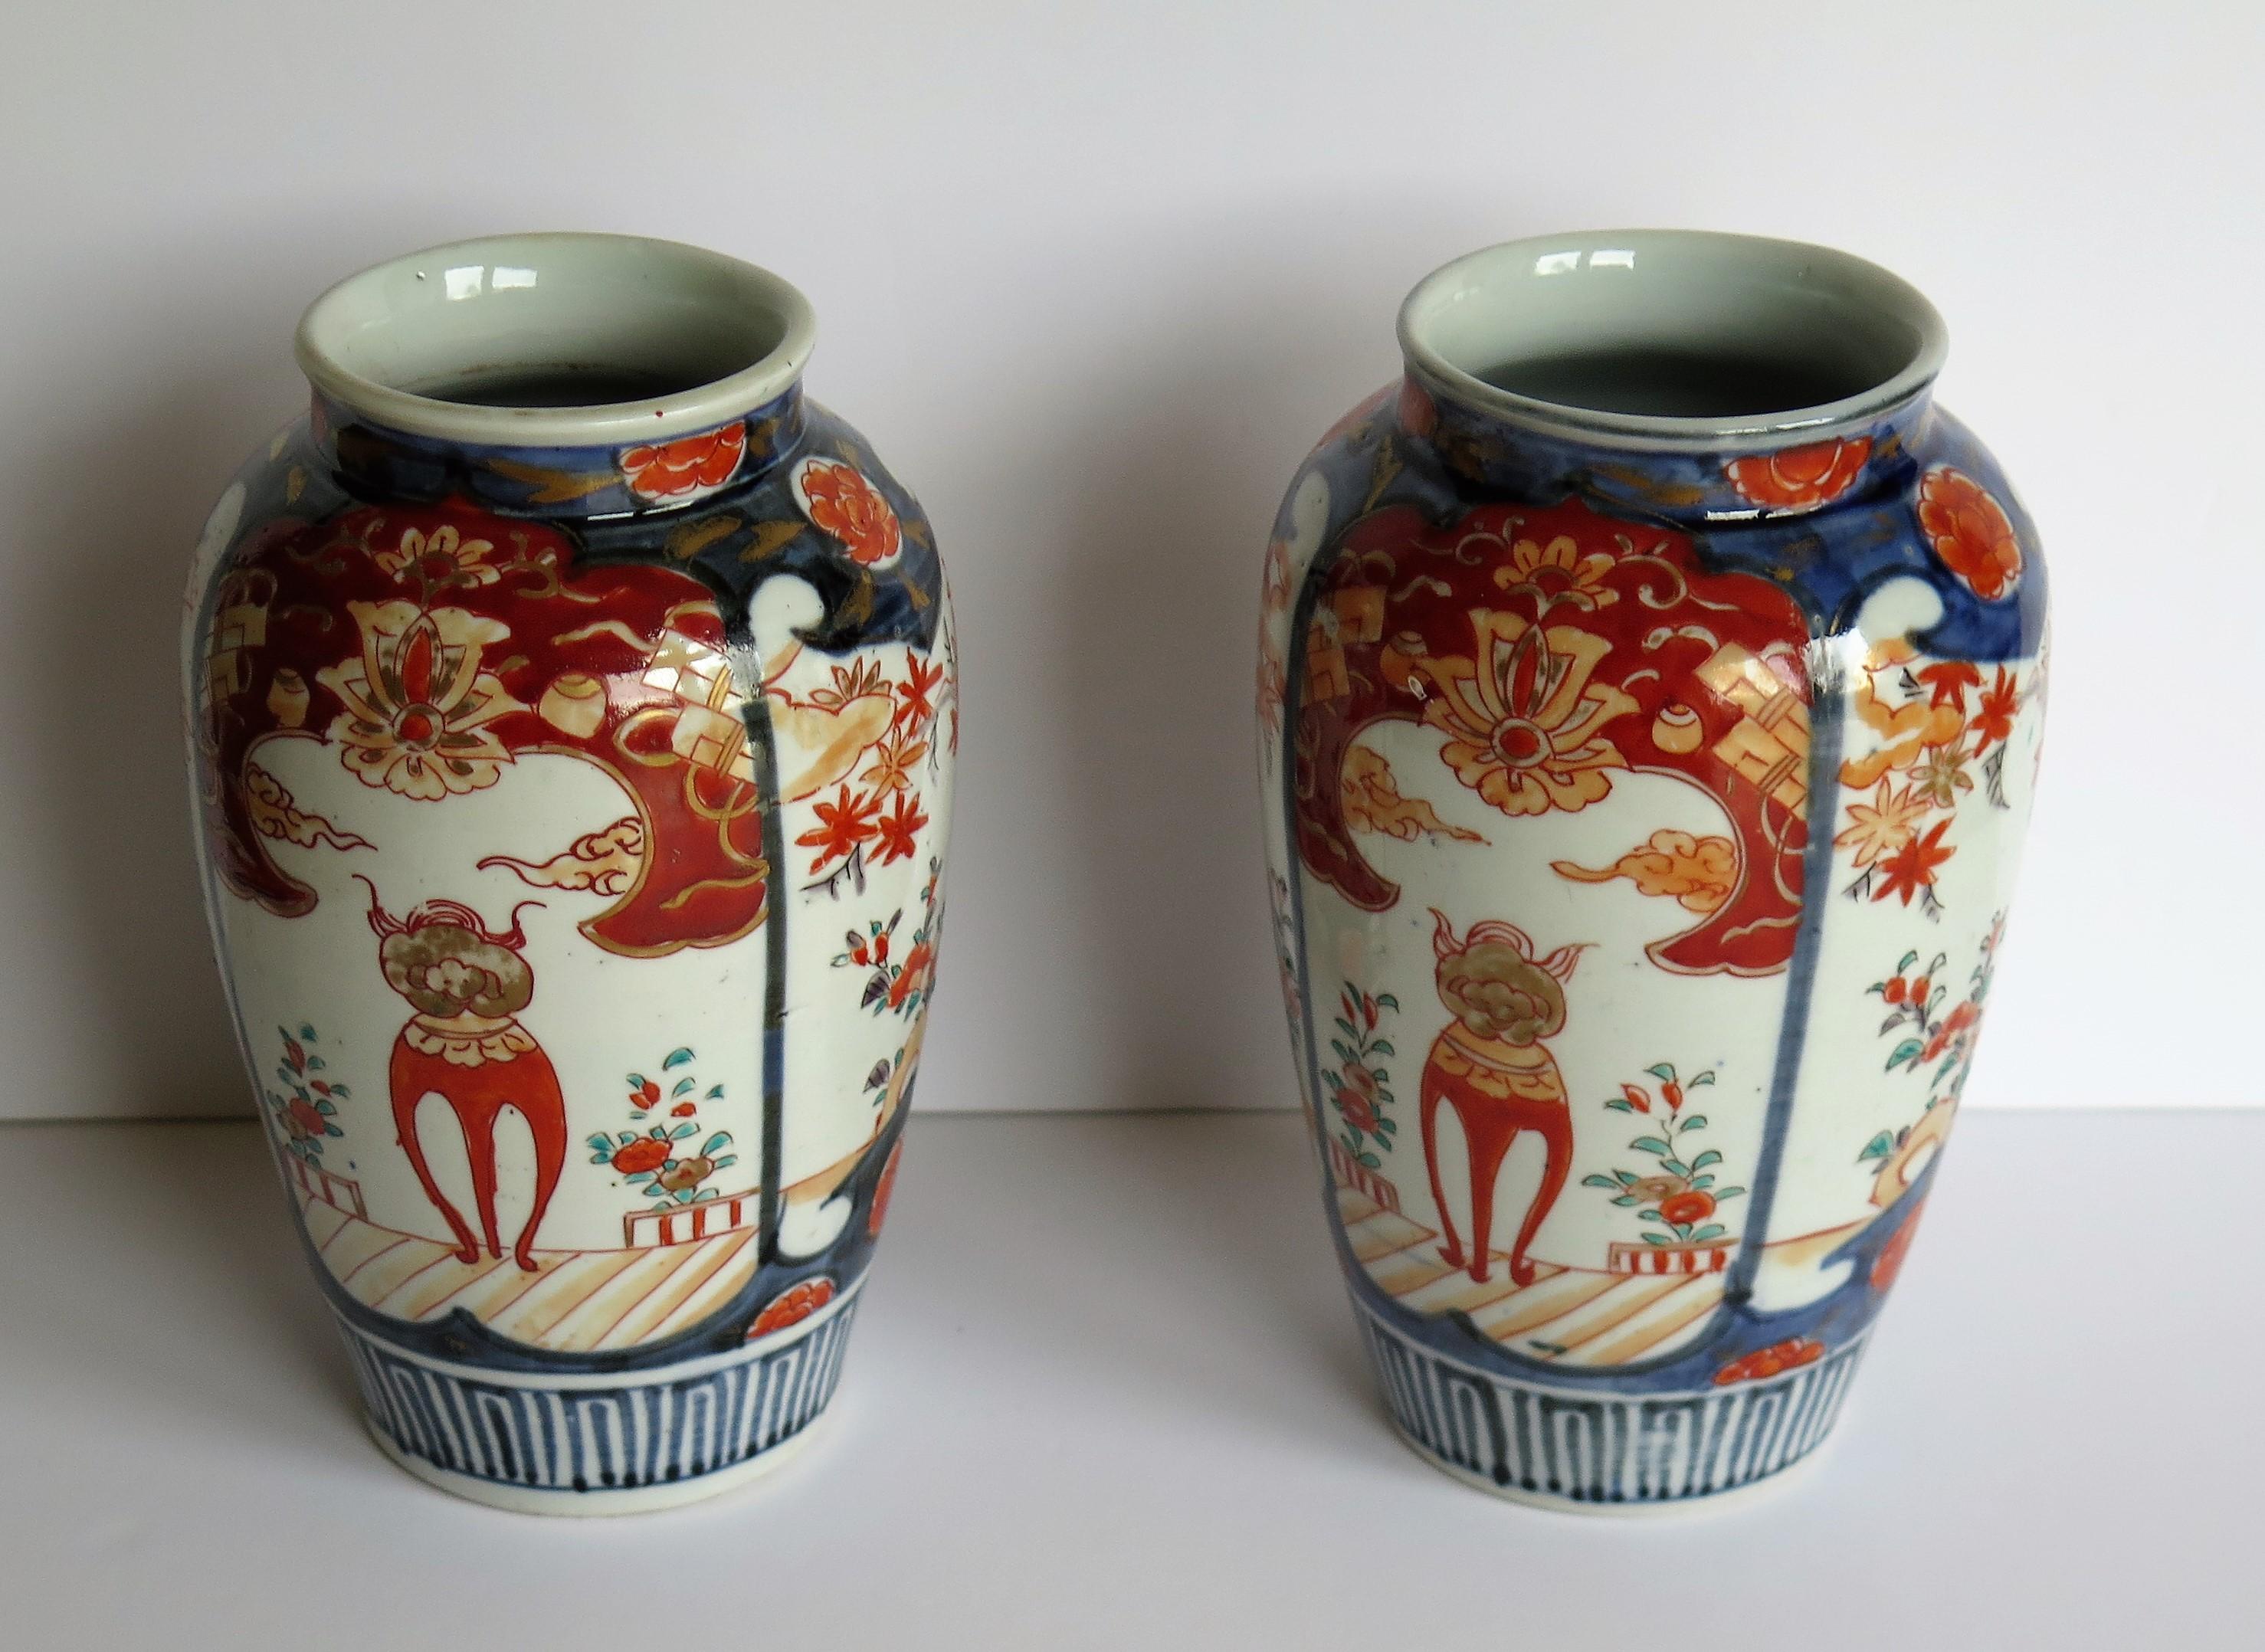 These are a good quality pair of very decorative gilded hand enameled Japanese porcelain vases which we date to the Meiji period of the 19th century, circa 1880.

Each vase has a baluster open necked shape and has been hand painted in an Imari